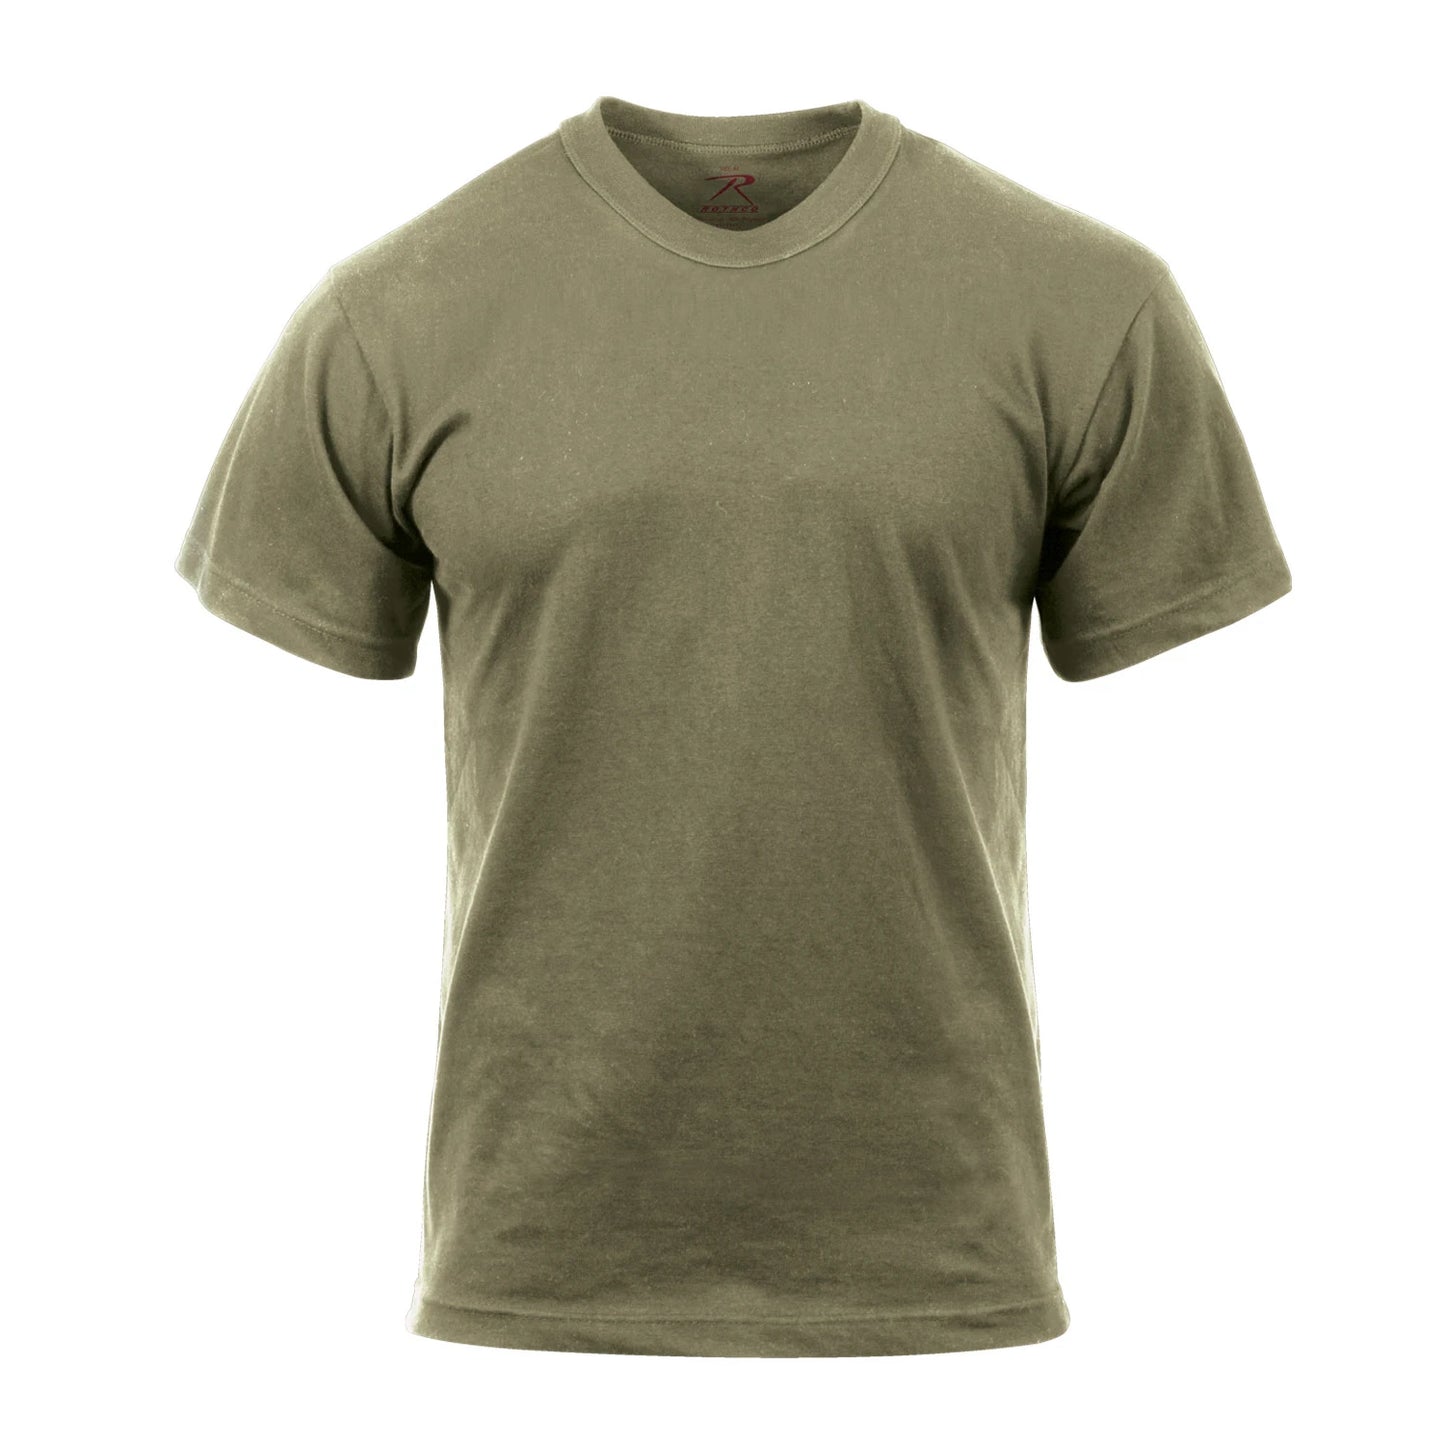 AR 670-1 Coyote Brown - Short Sleeve T-Shirt